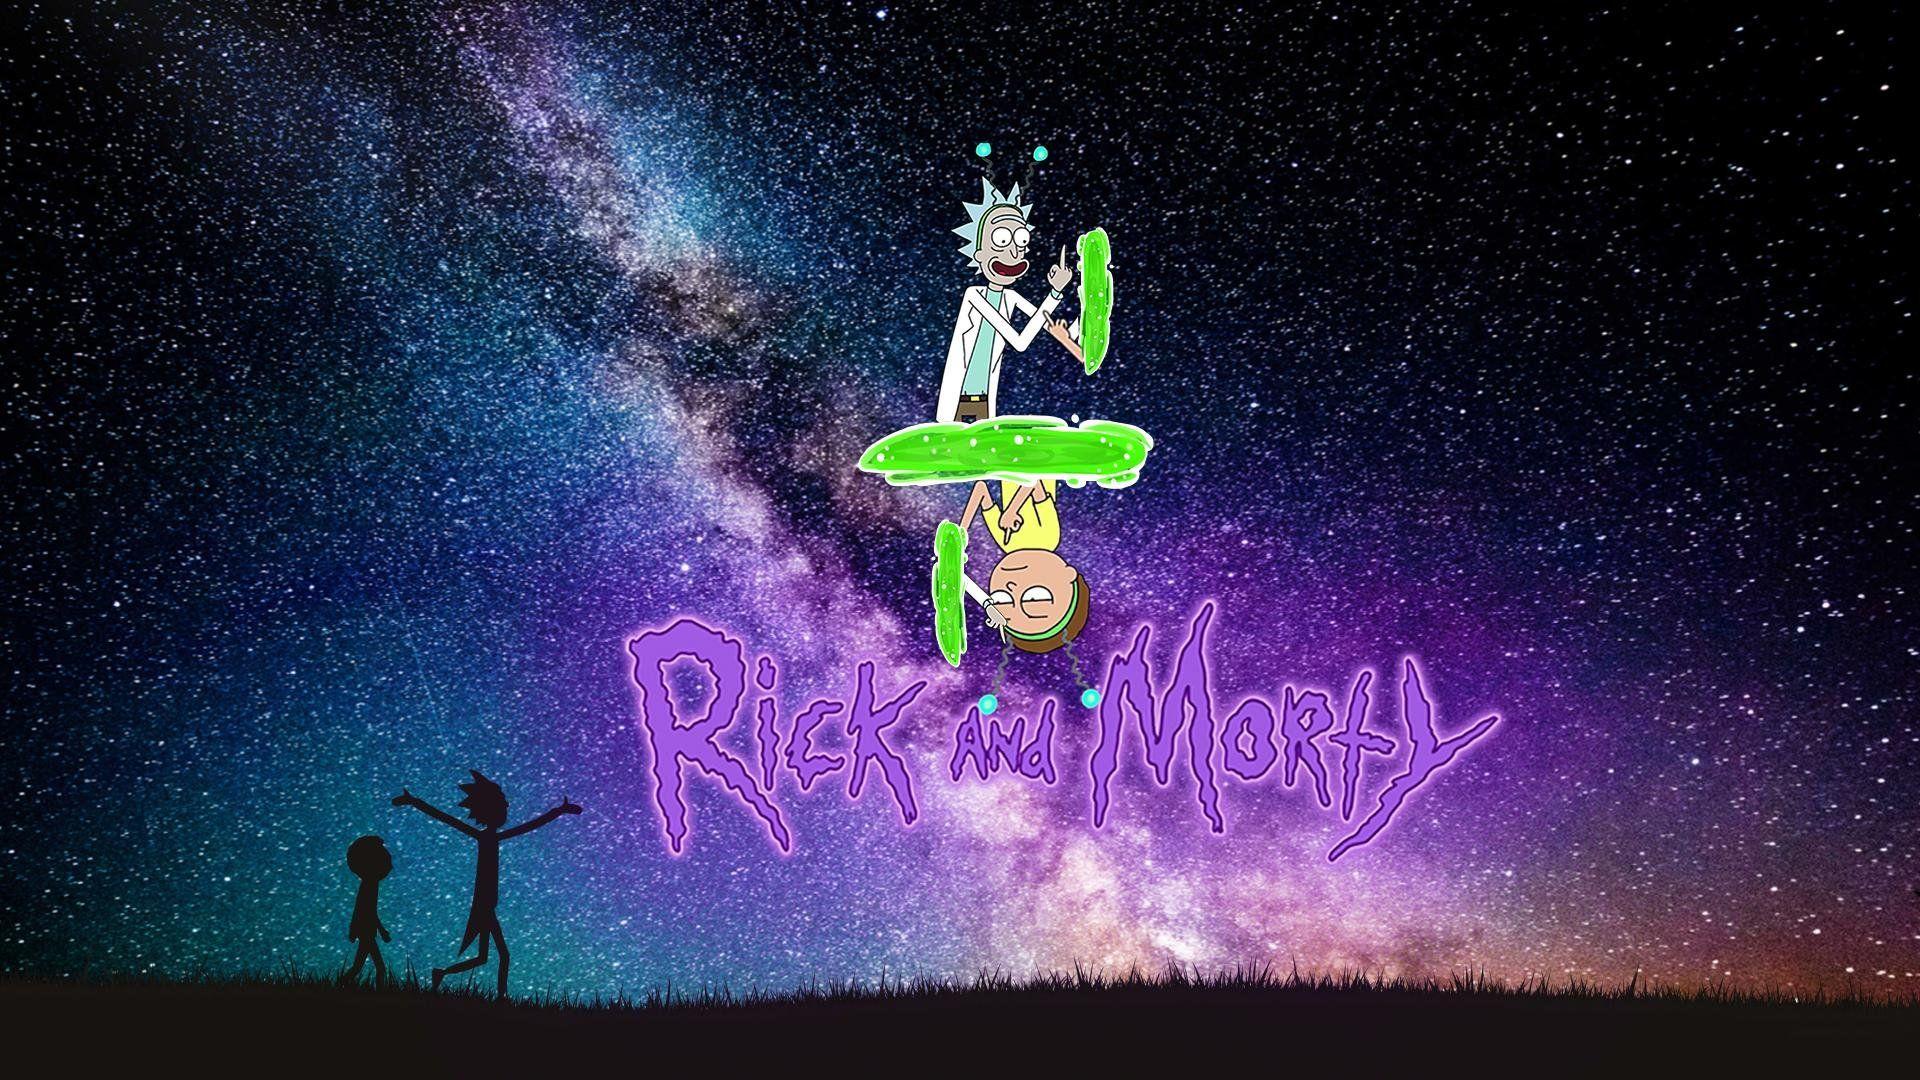 1920 x 1080 · jpeg - Coolest PC Minimalist Rick And Morty Wallpapers - Wallpaper Cave